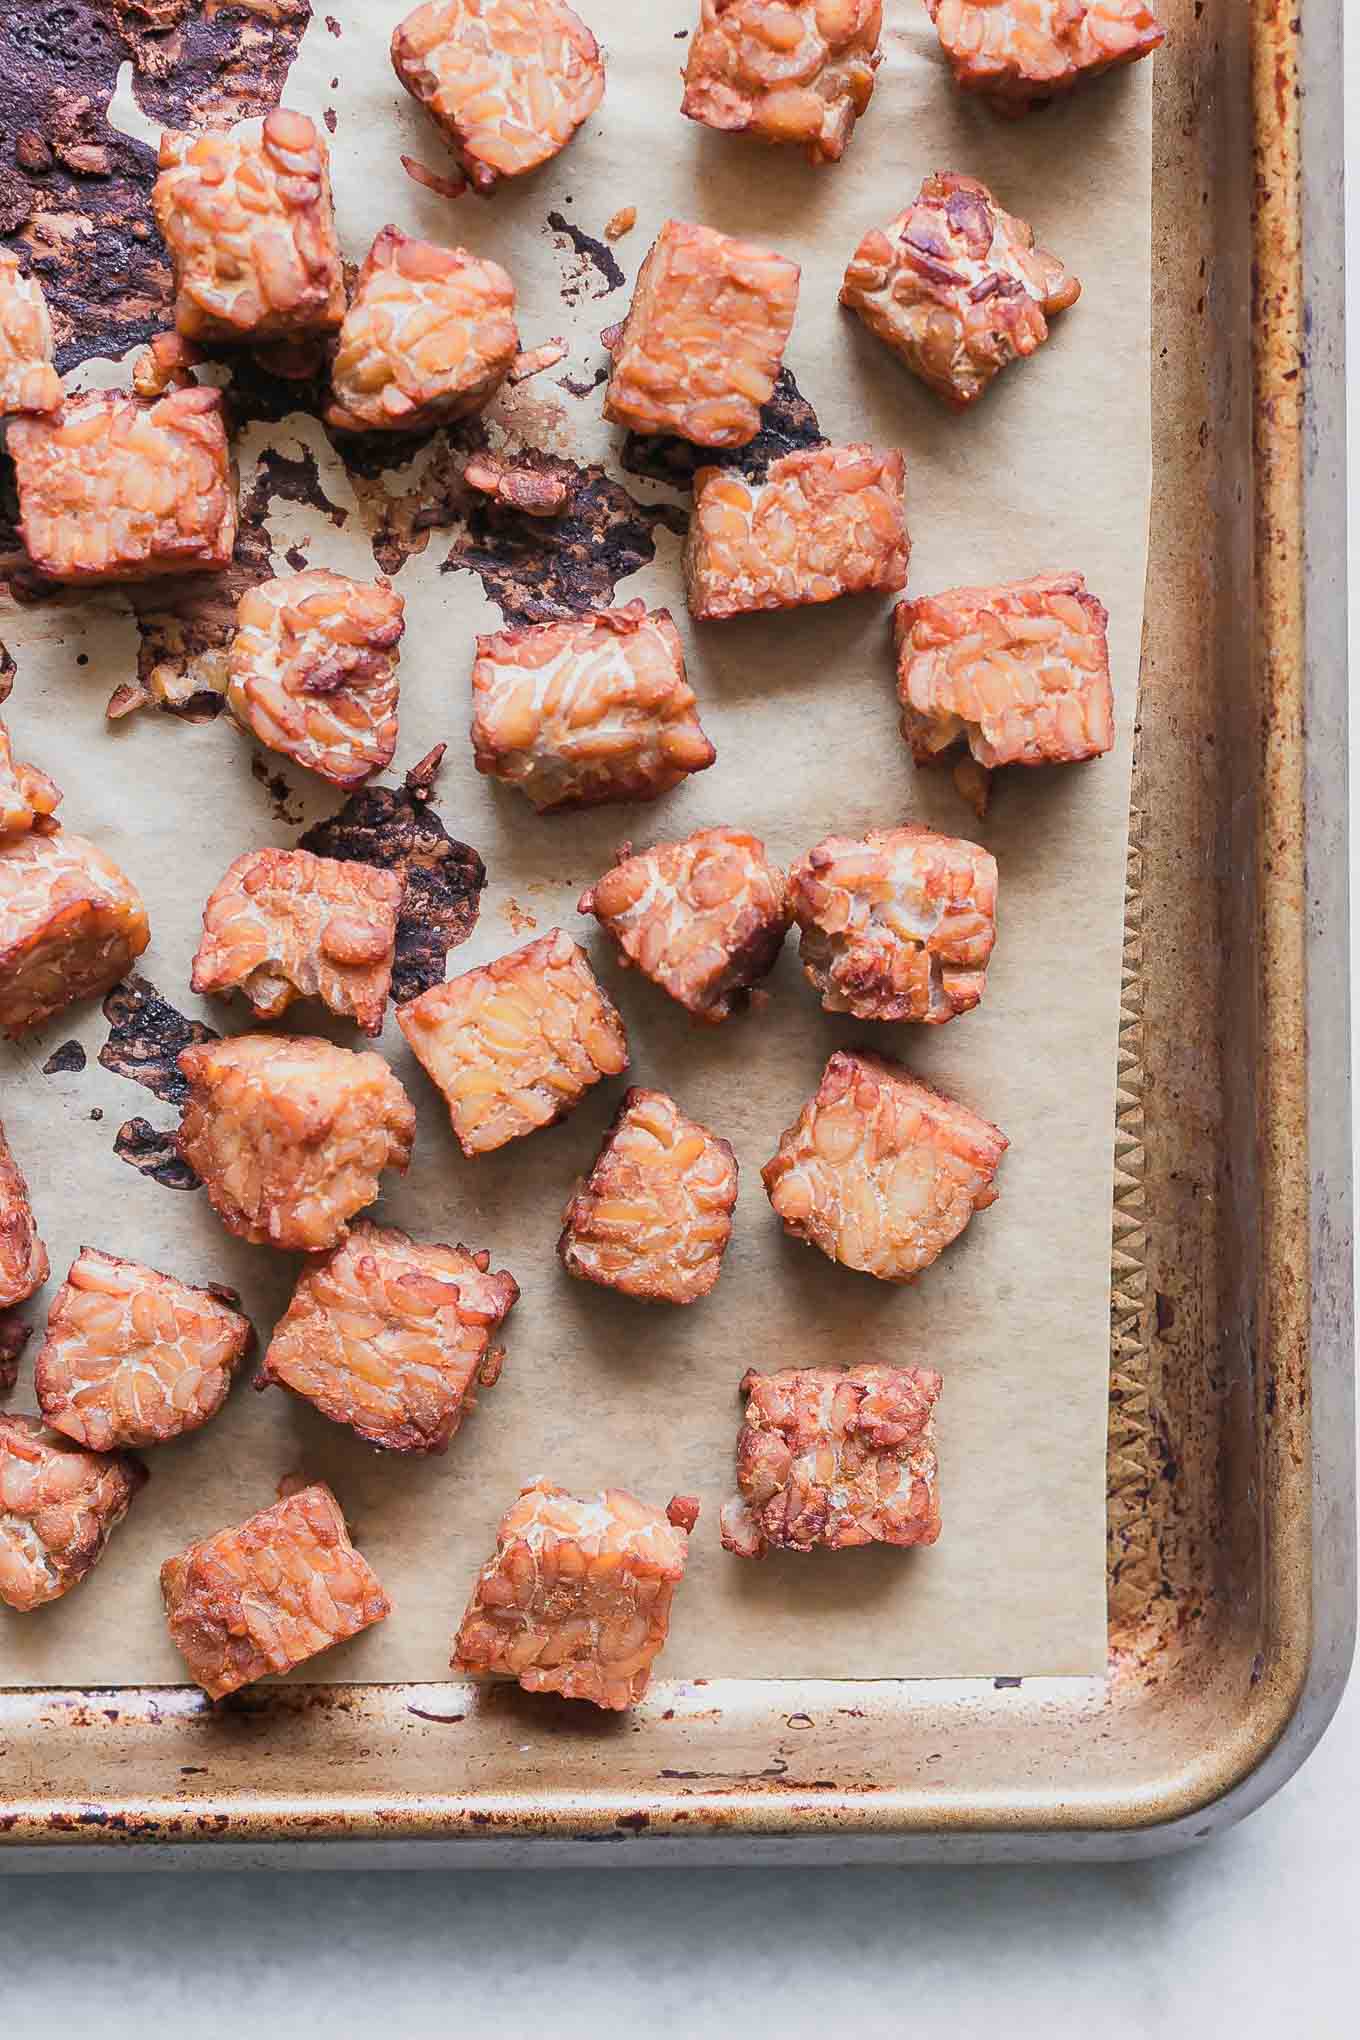 How to Make Crispy Tempeh in the Oven